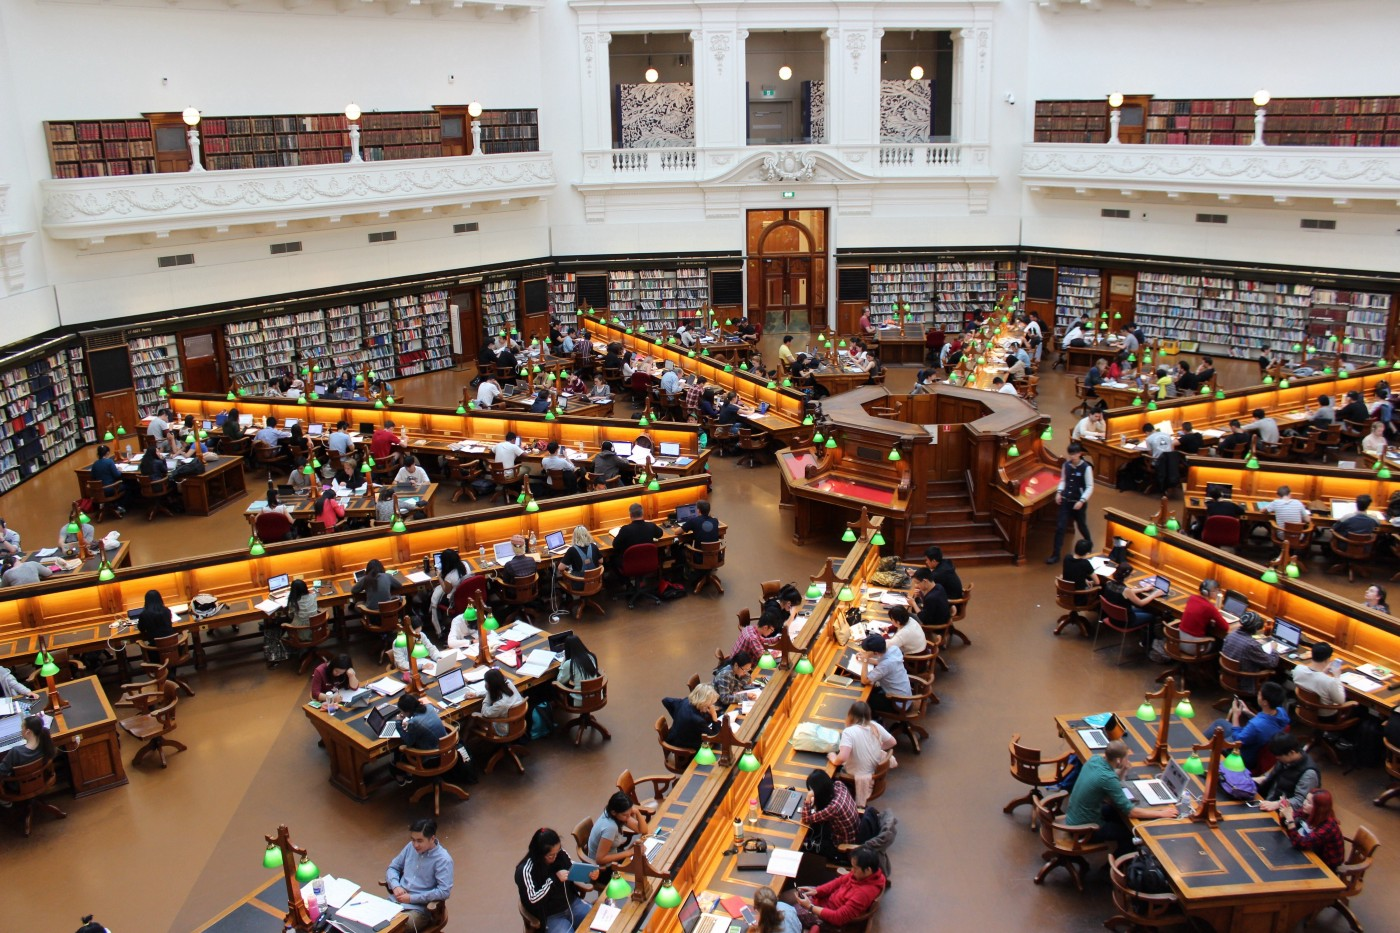 Students sit at long desks in a large, round library space, where the desks are arranged like the spokes on a wheel.